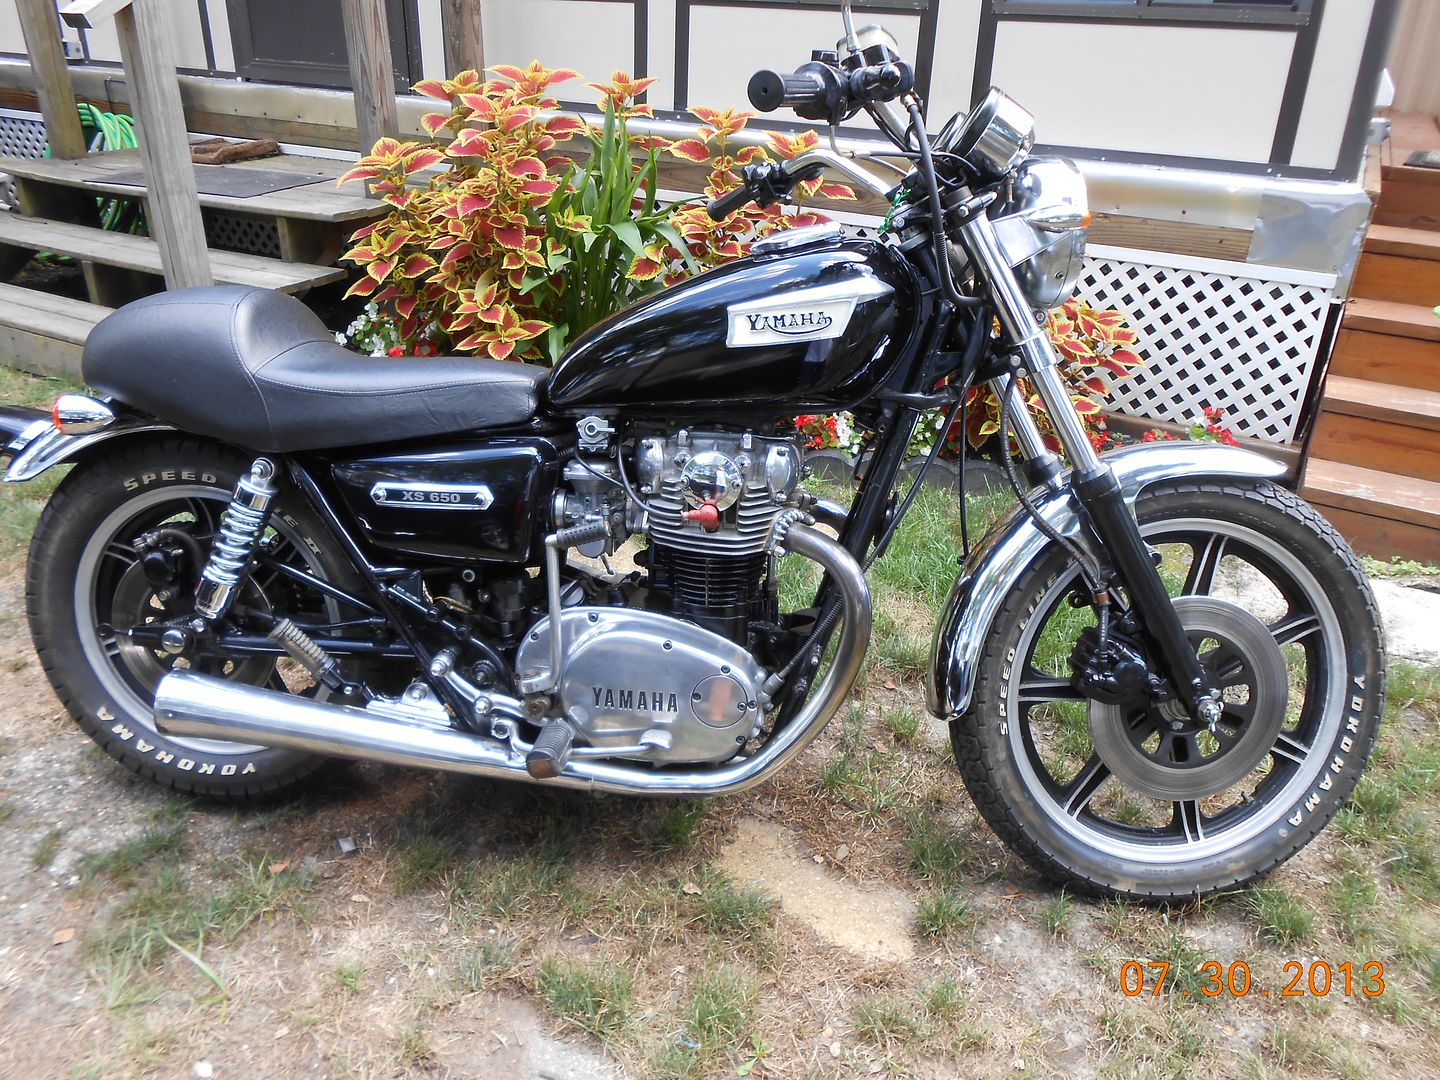 1979XS650HERITAGESPECIAL13453MILES001_zps787bf794.jpg